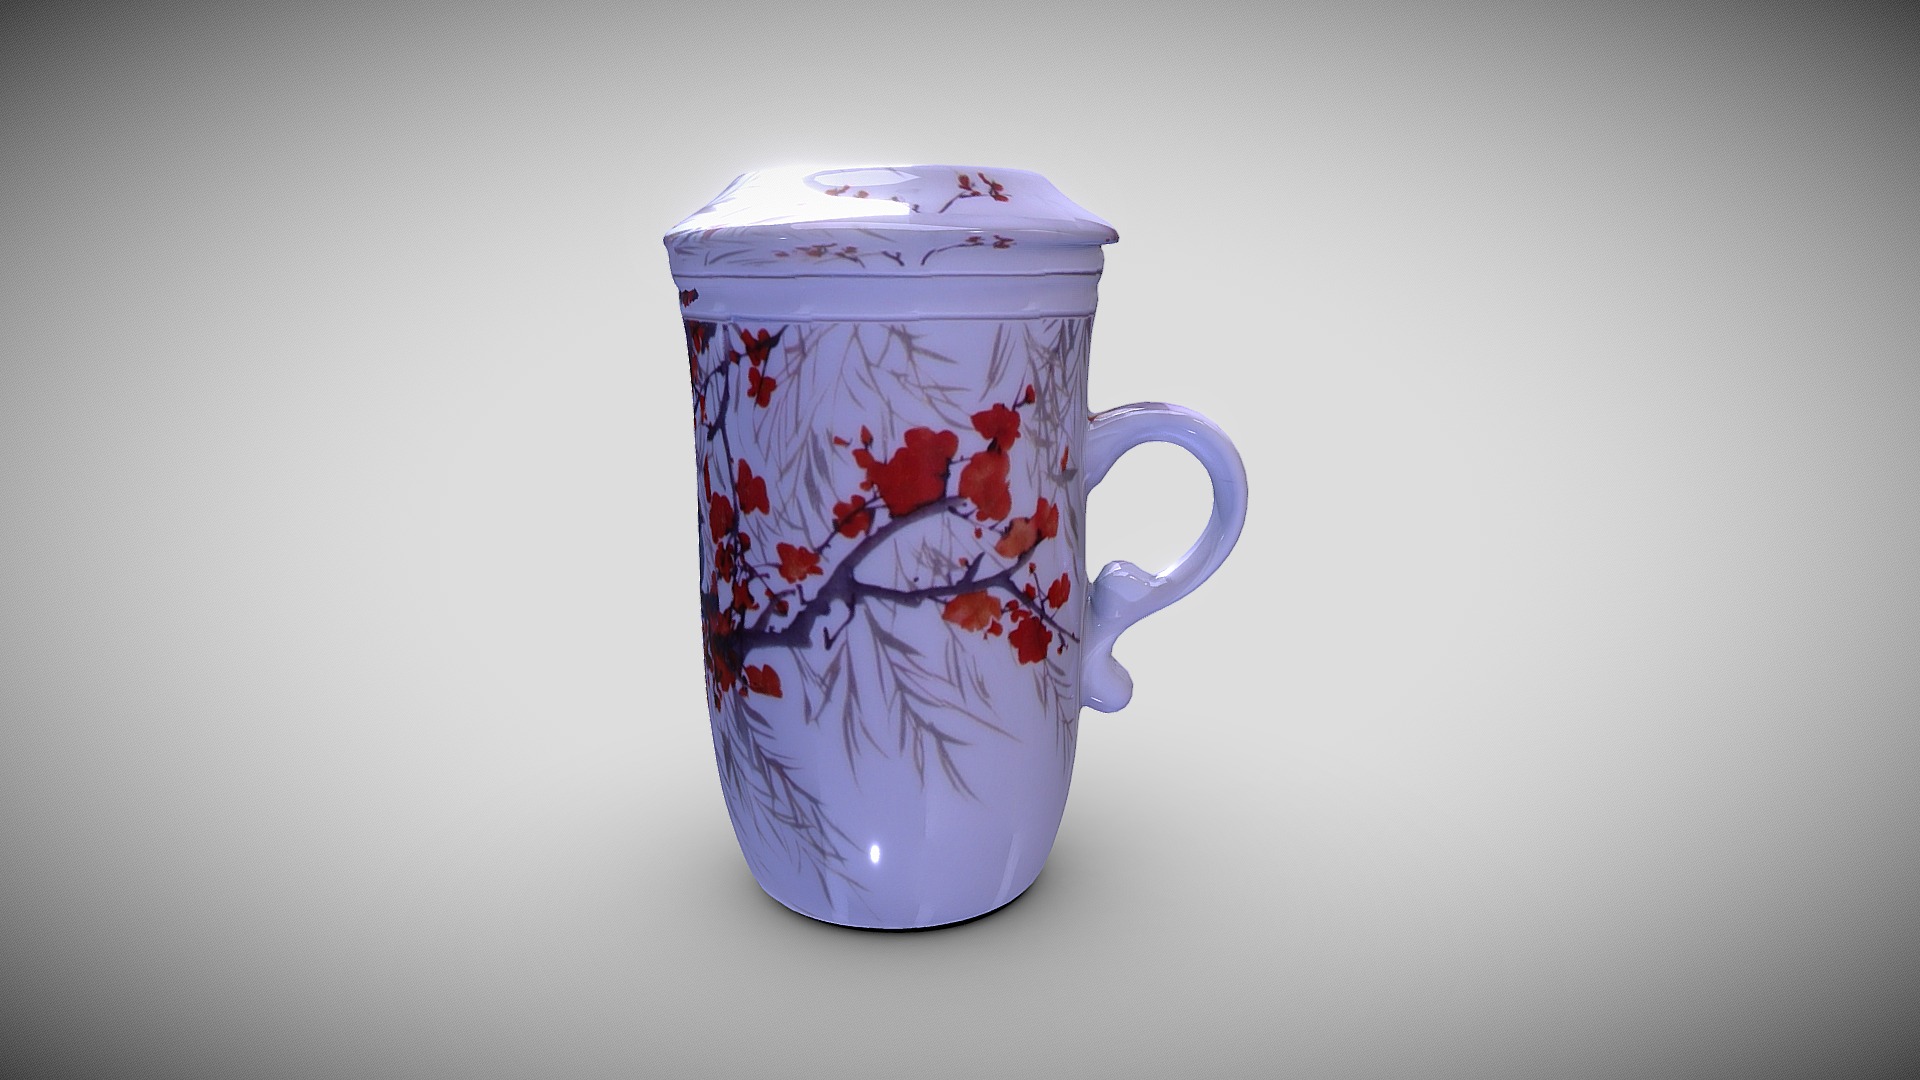 3D model Scanned Model – Oriental Cup - This is a 3D model of the Scanned Model - Oriental Cup. The 3D model is about a white and red vase.